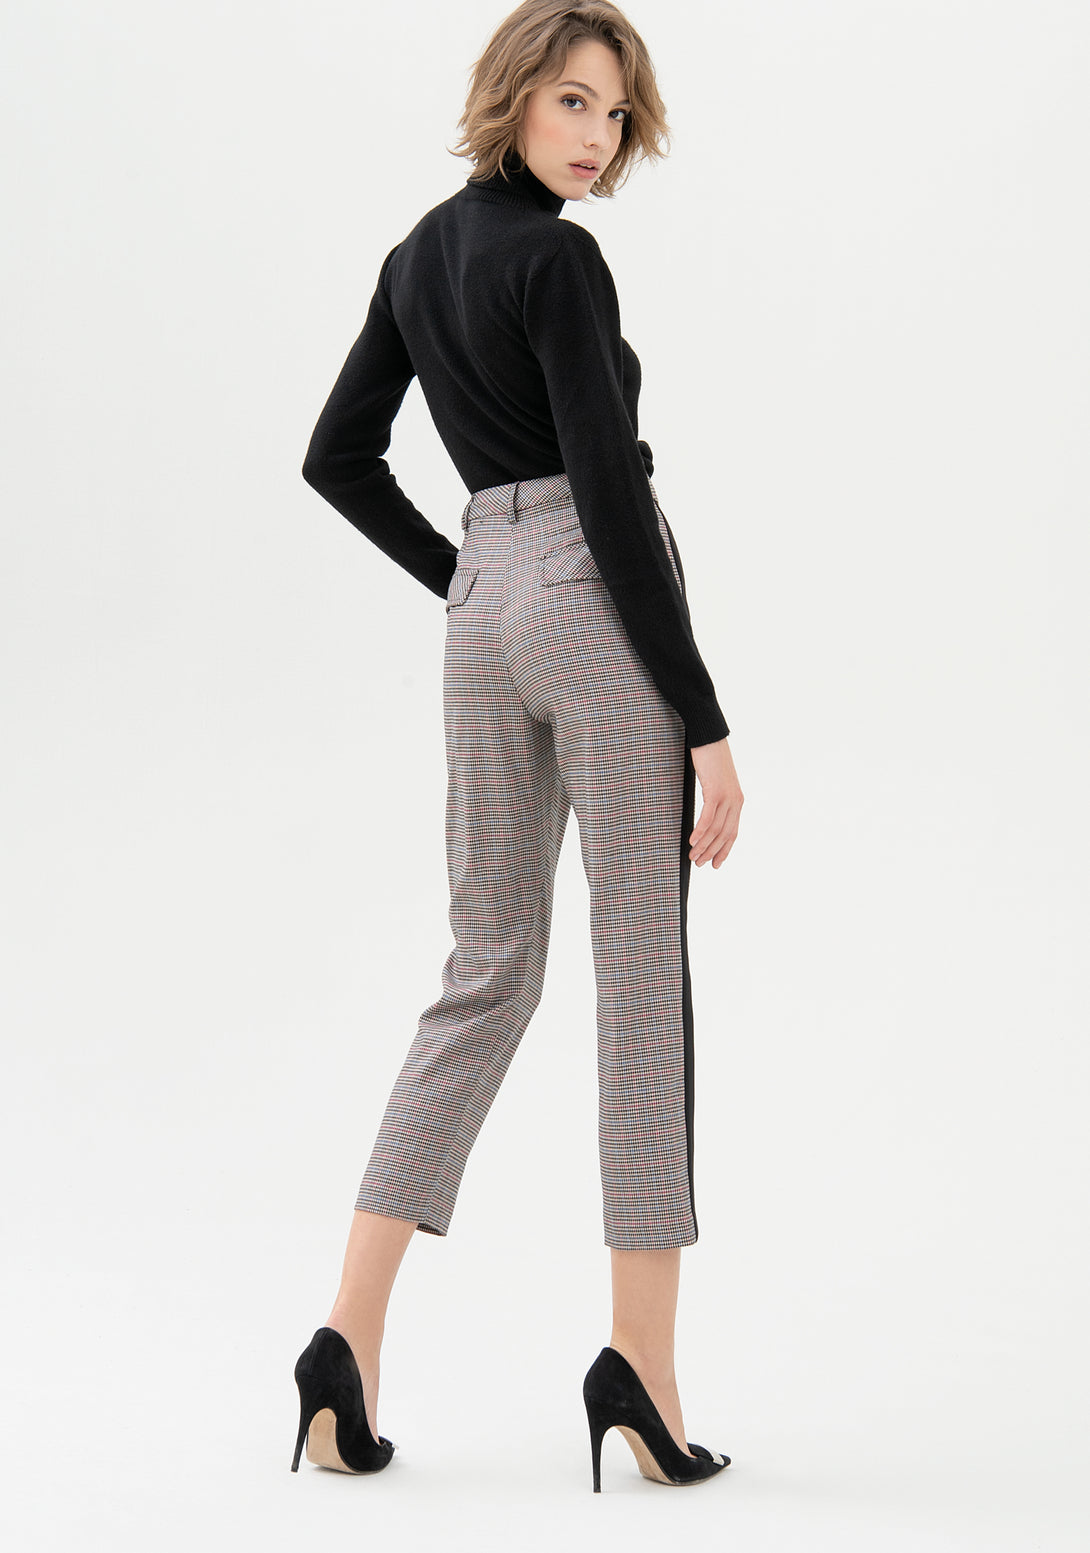 Straight leg pant made in pied de poule fabric